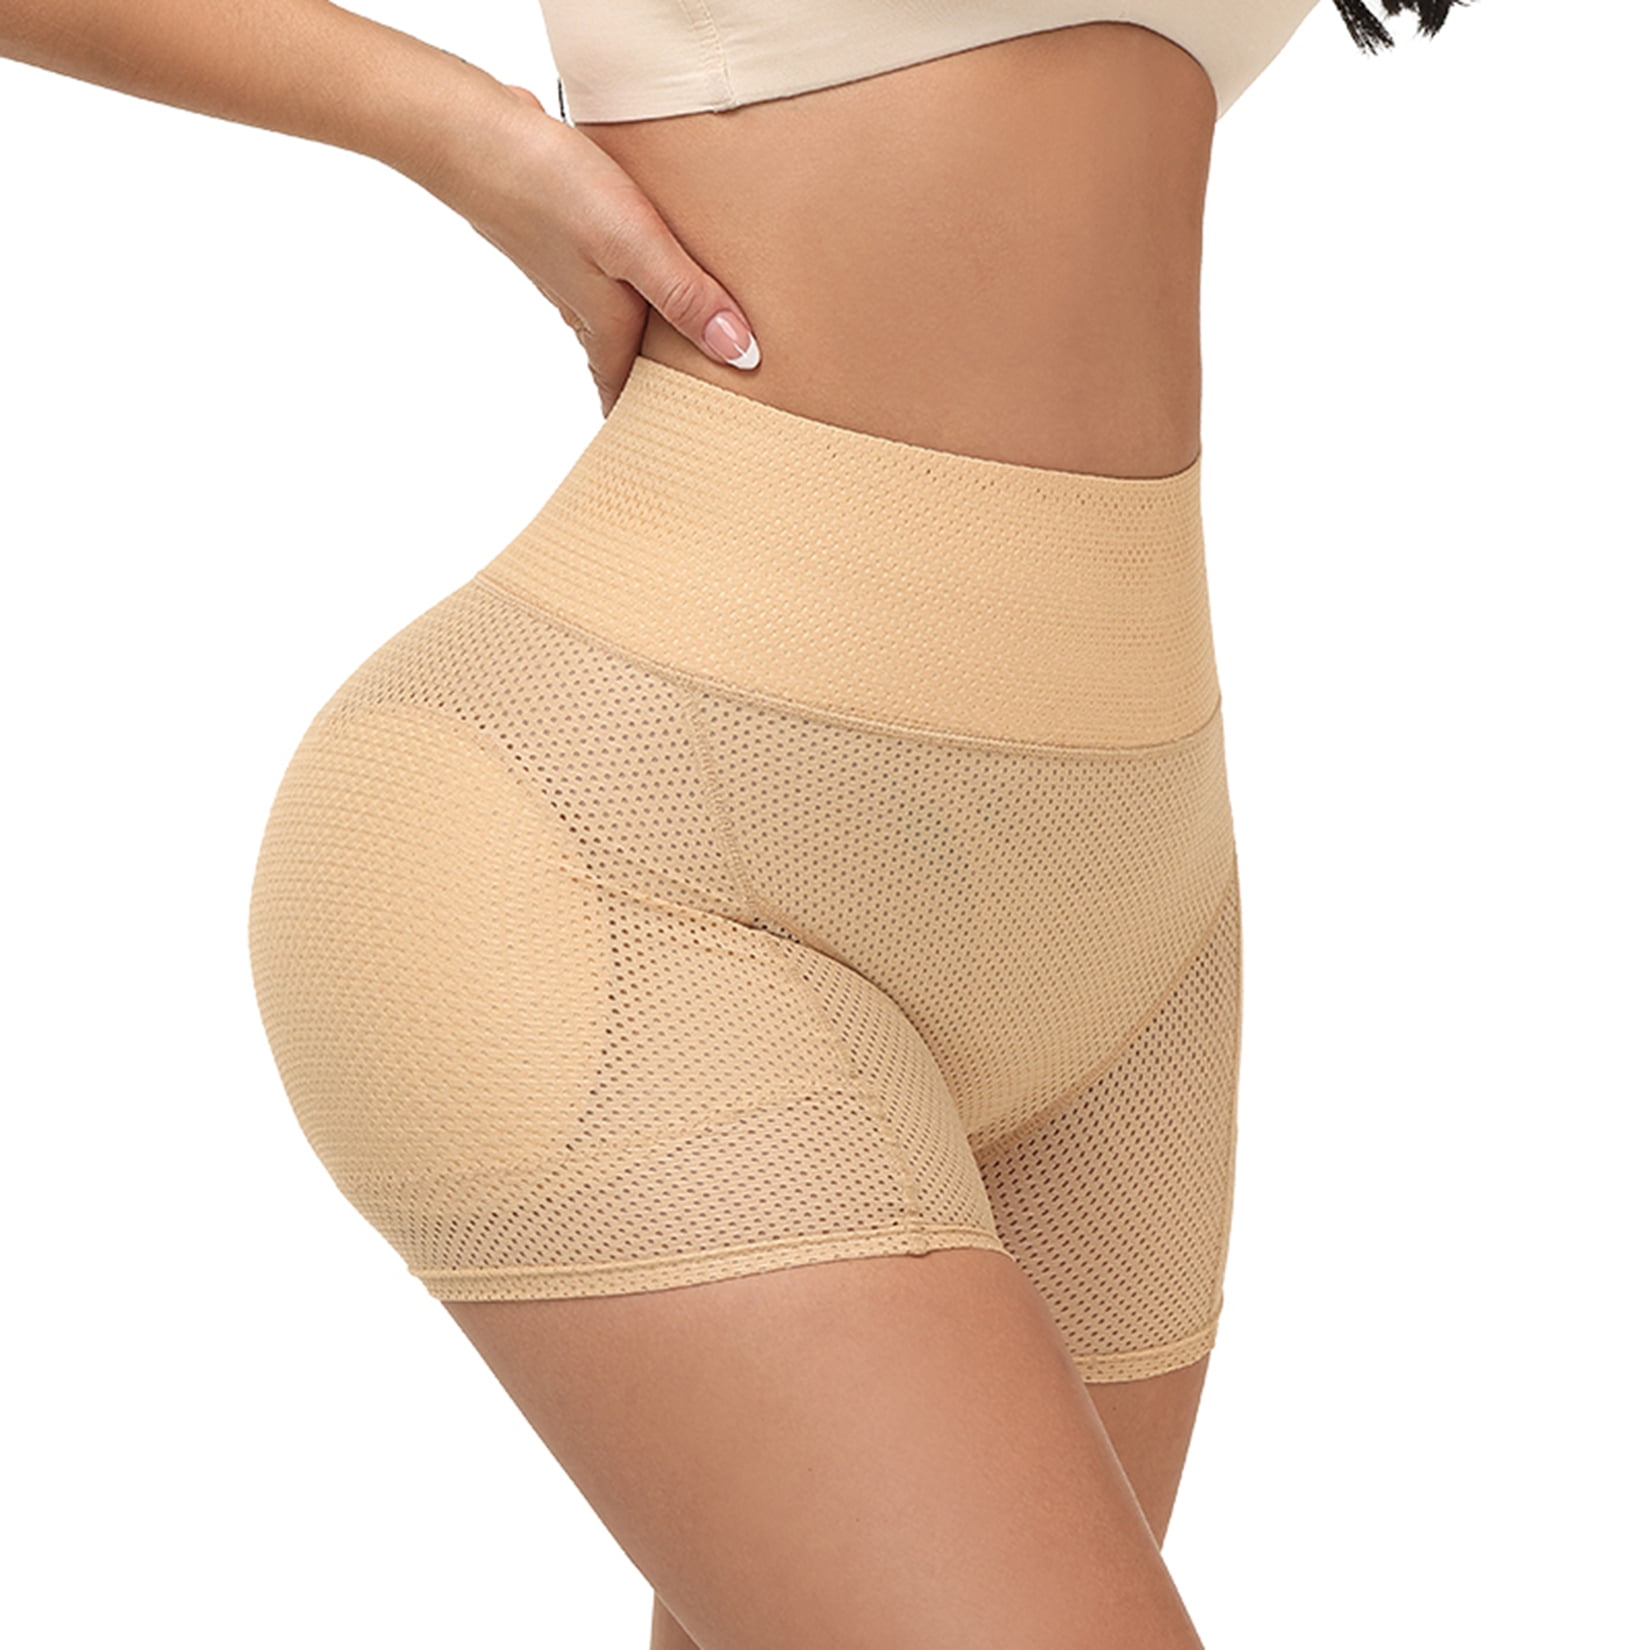 Sexy High Waist Lace Hip Shaper Panty With Padded Panties And Butt Pad For  Women Slimming Bodyshaper Underwear And Shapewear From Stpf, $27.96